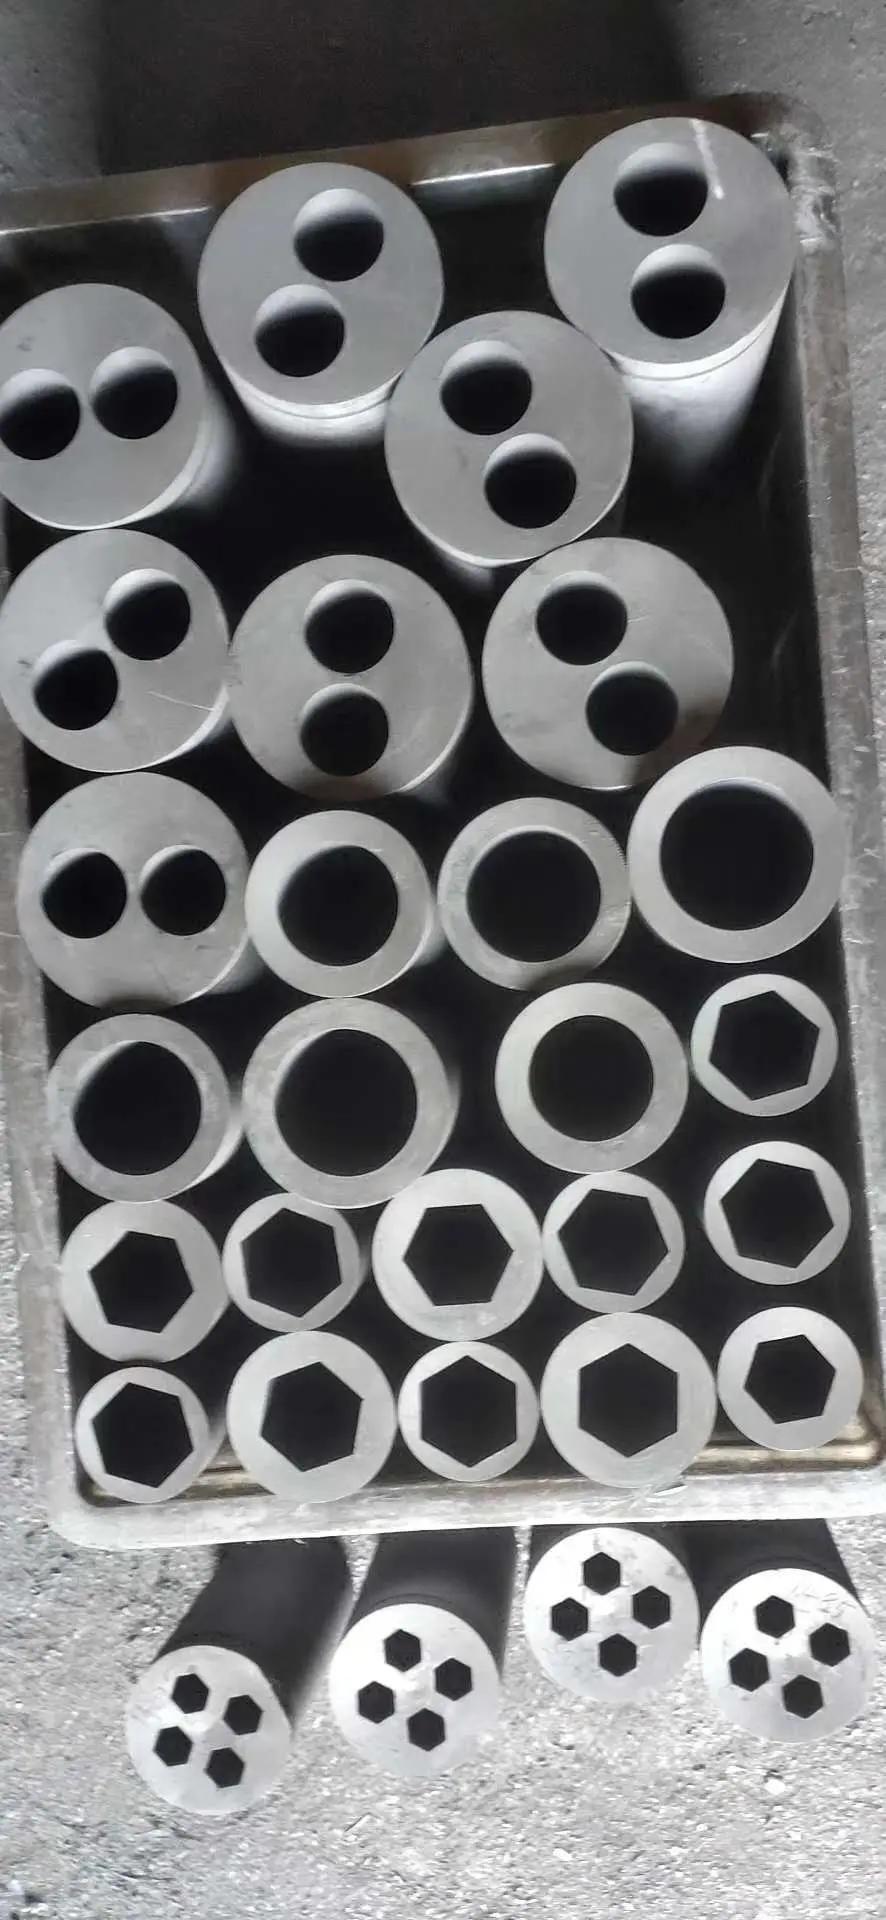 Density 1.91g Graphite Mold with Coating for Brass Casting